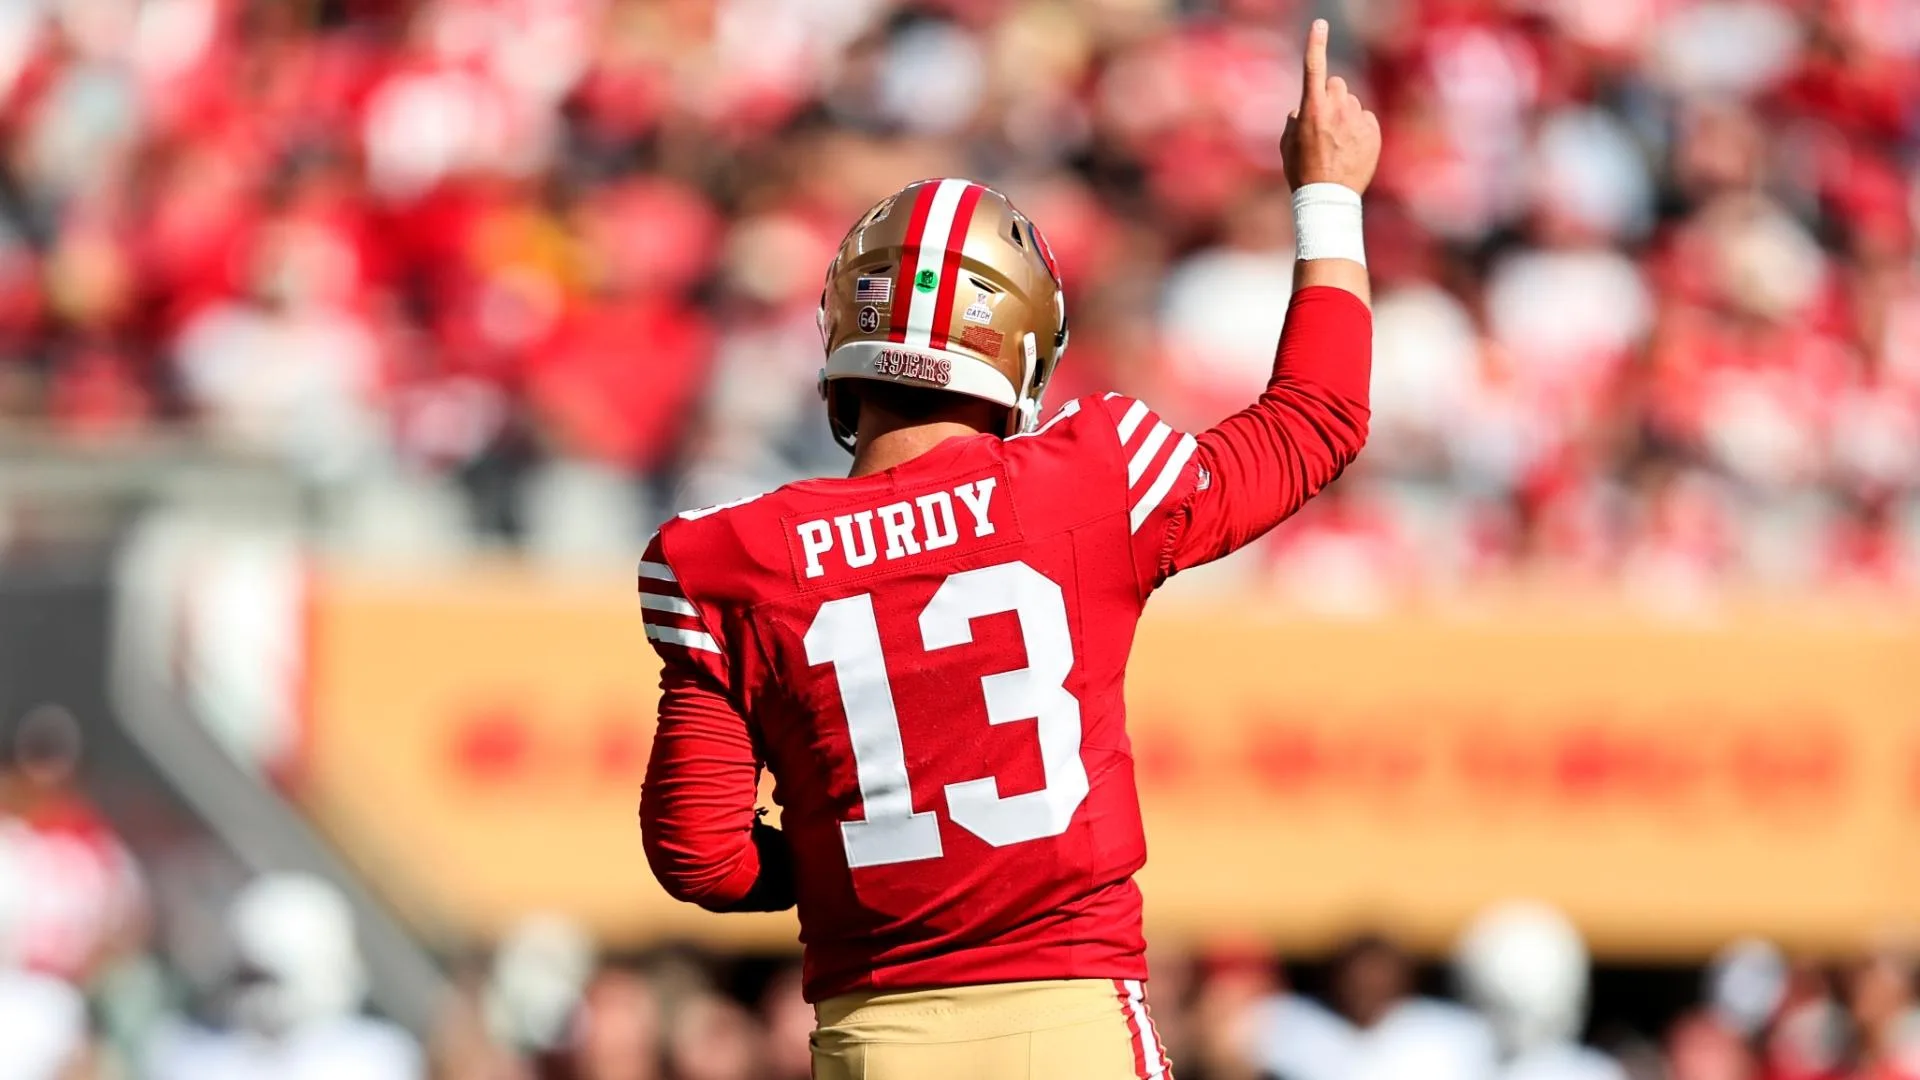 San Francisco quarterback Brock Purdy and the 49ers will host Aaron Rodgers and his return to the NFL after an Achilles injury, as the New York Jets visit the Niners on "Monday Night Football" the first week of the season. (Photo courtesy of THE SPORTING NEWS)